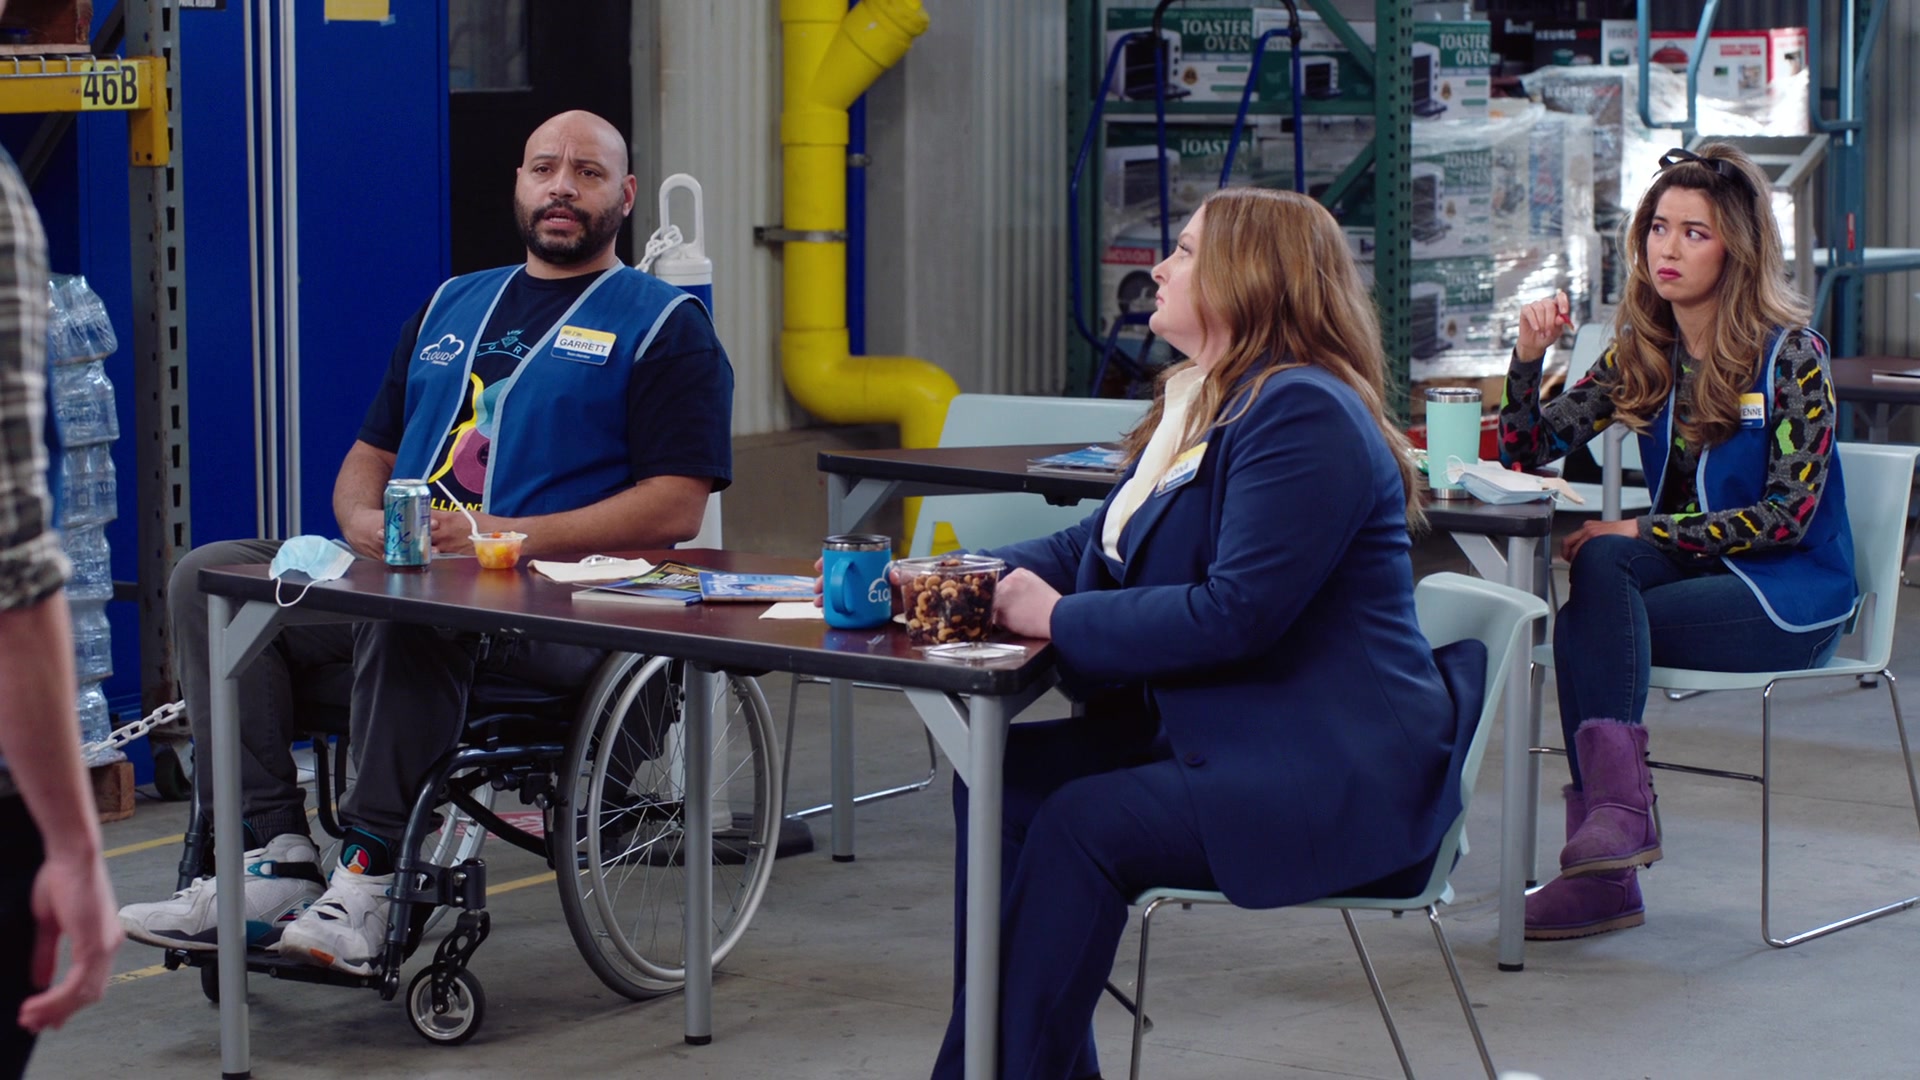 Nike Air Jordan Worn By Colton Dunn As Garrett And LaCroix Sparkling Water Can In Superstore S06E10 "Depositions" (2021)